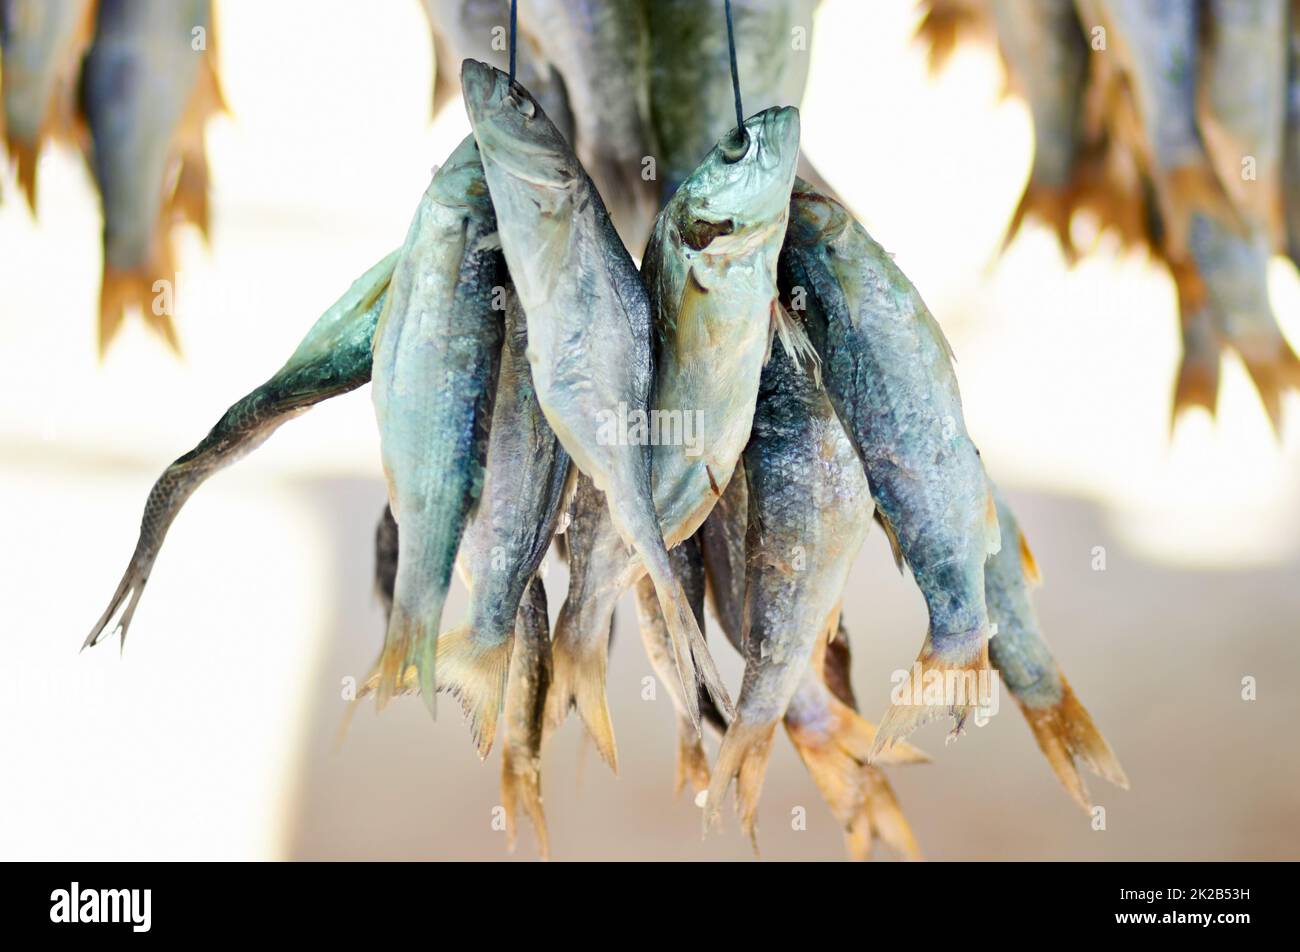 As fresh as it gets. Closeup shot of dead fish hanging in bunches. Stock Photo